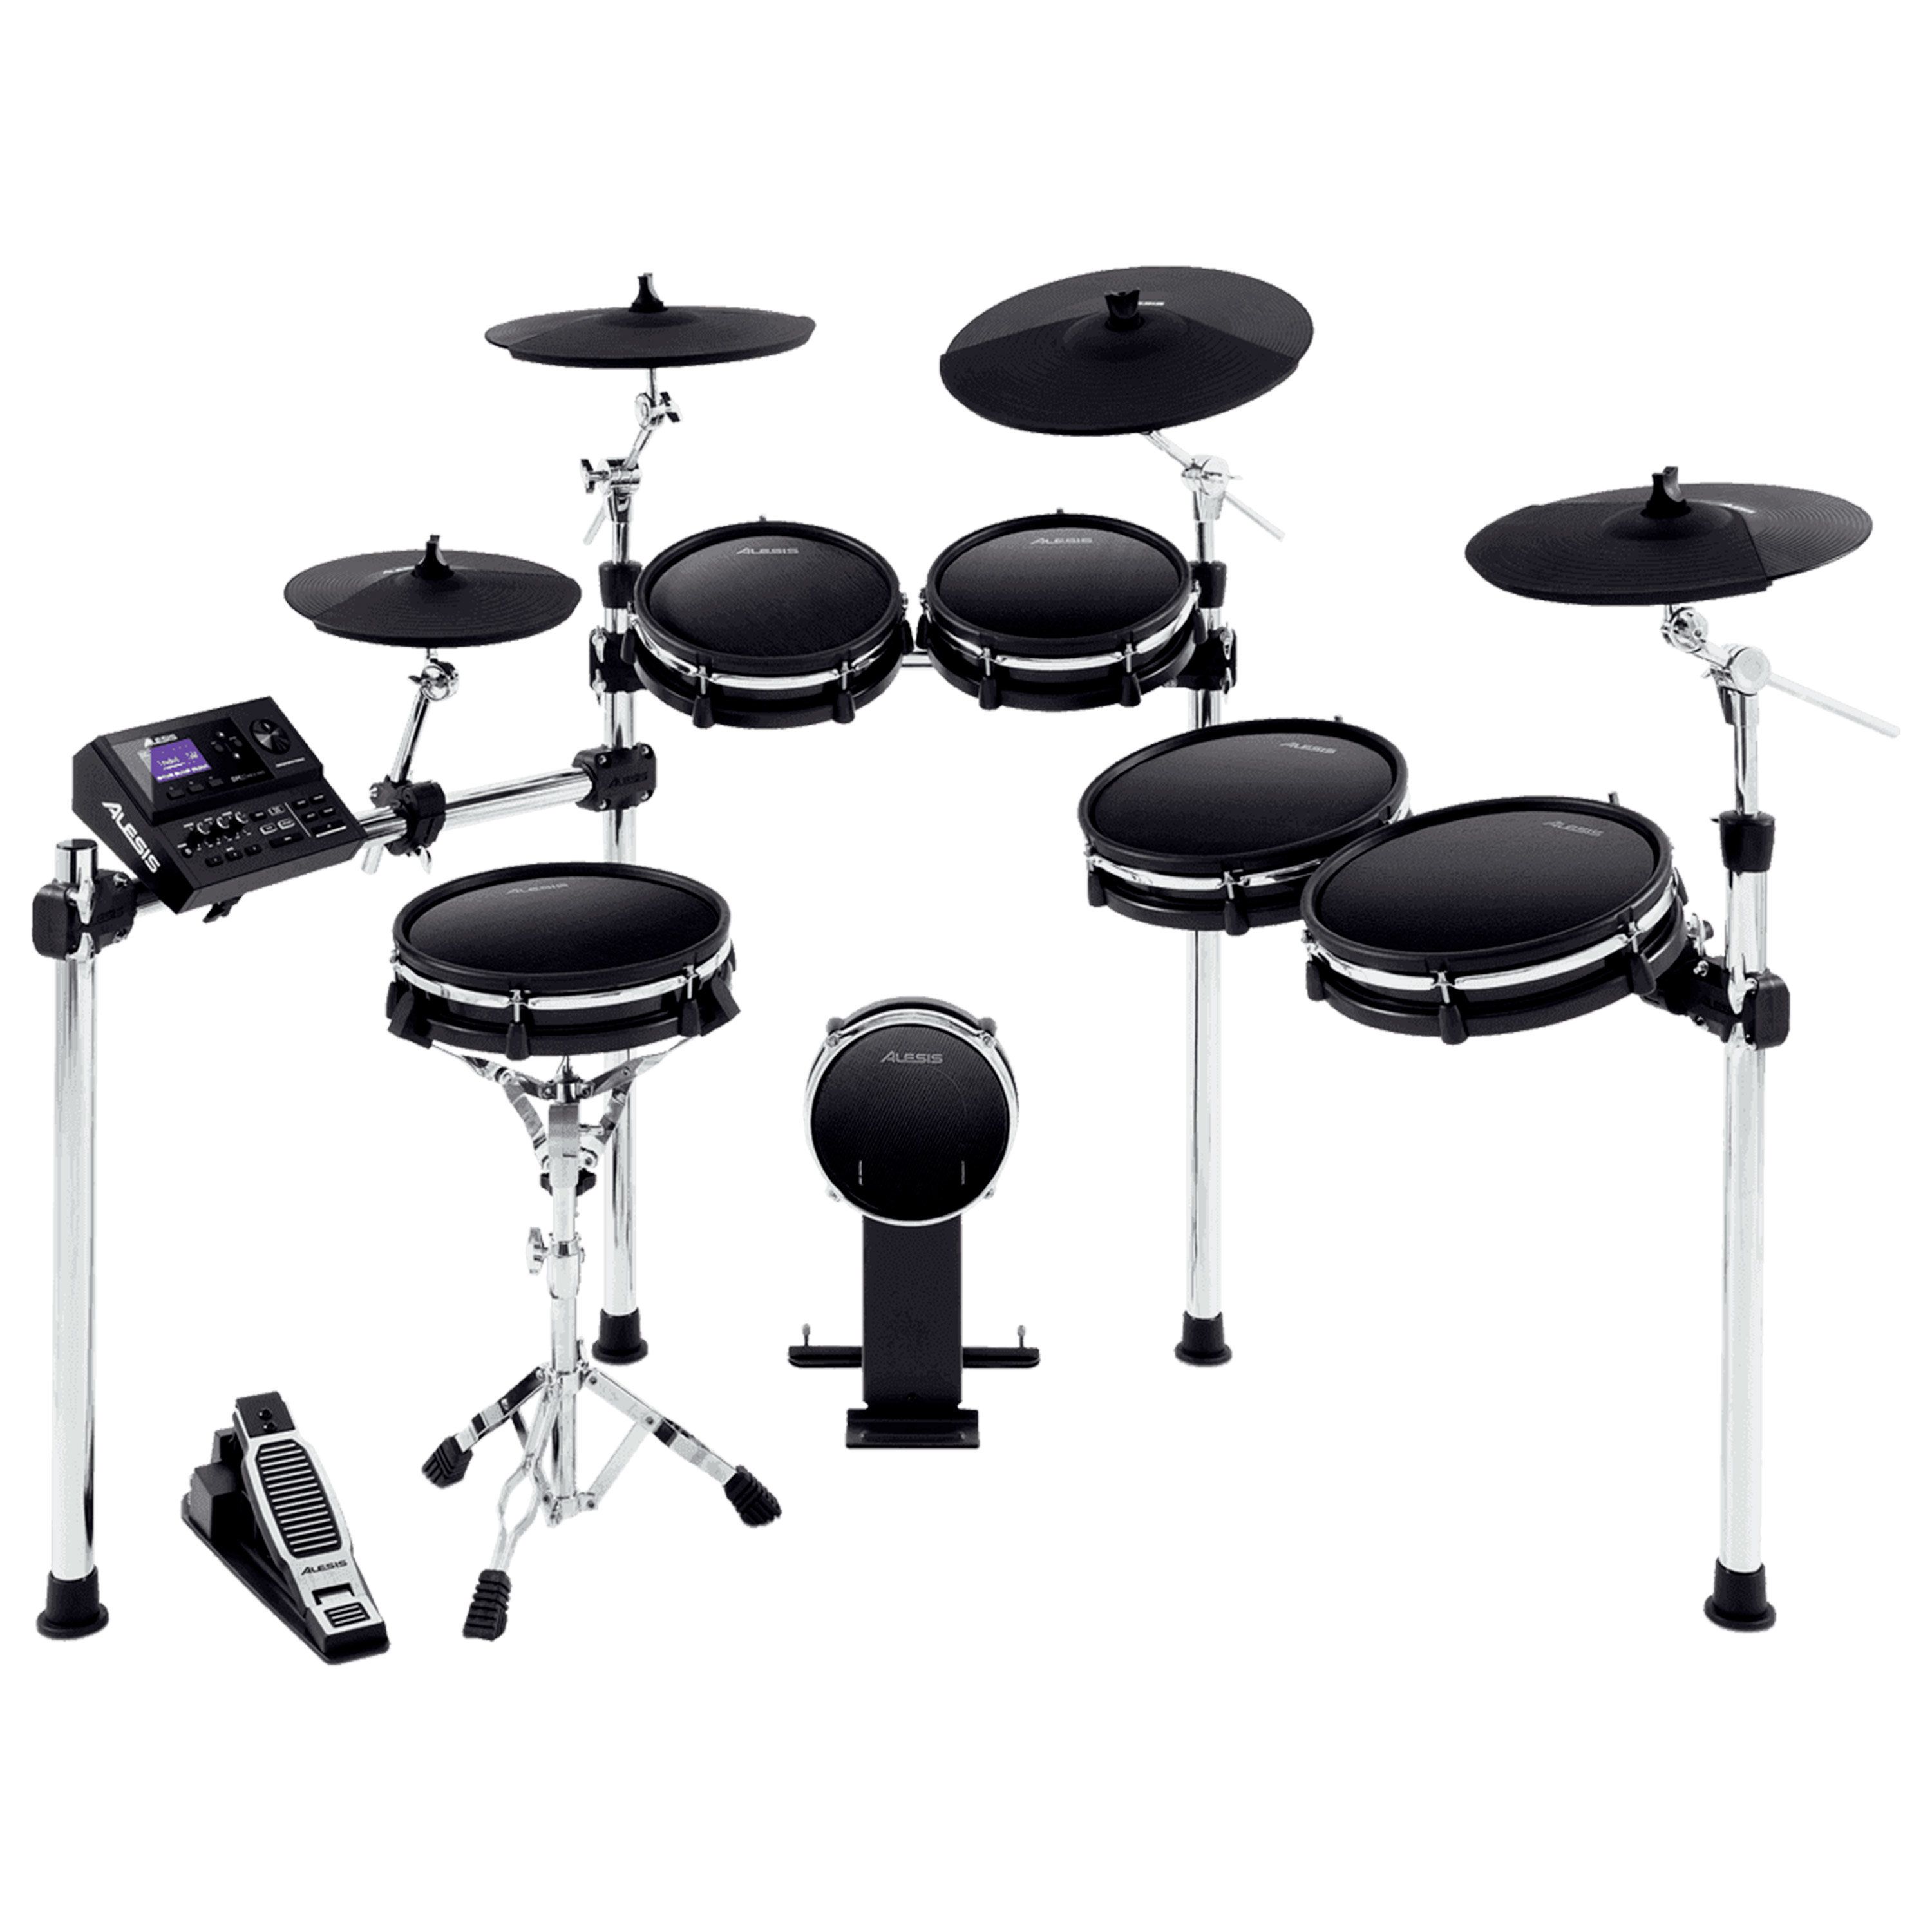 No Mounts Chrome Alesis Surge Drum Rack Brand New Stand for Electronic Kit 